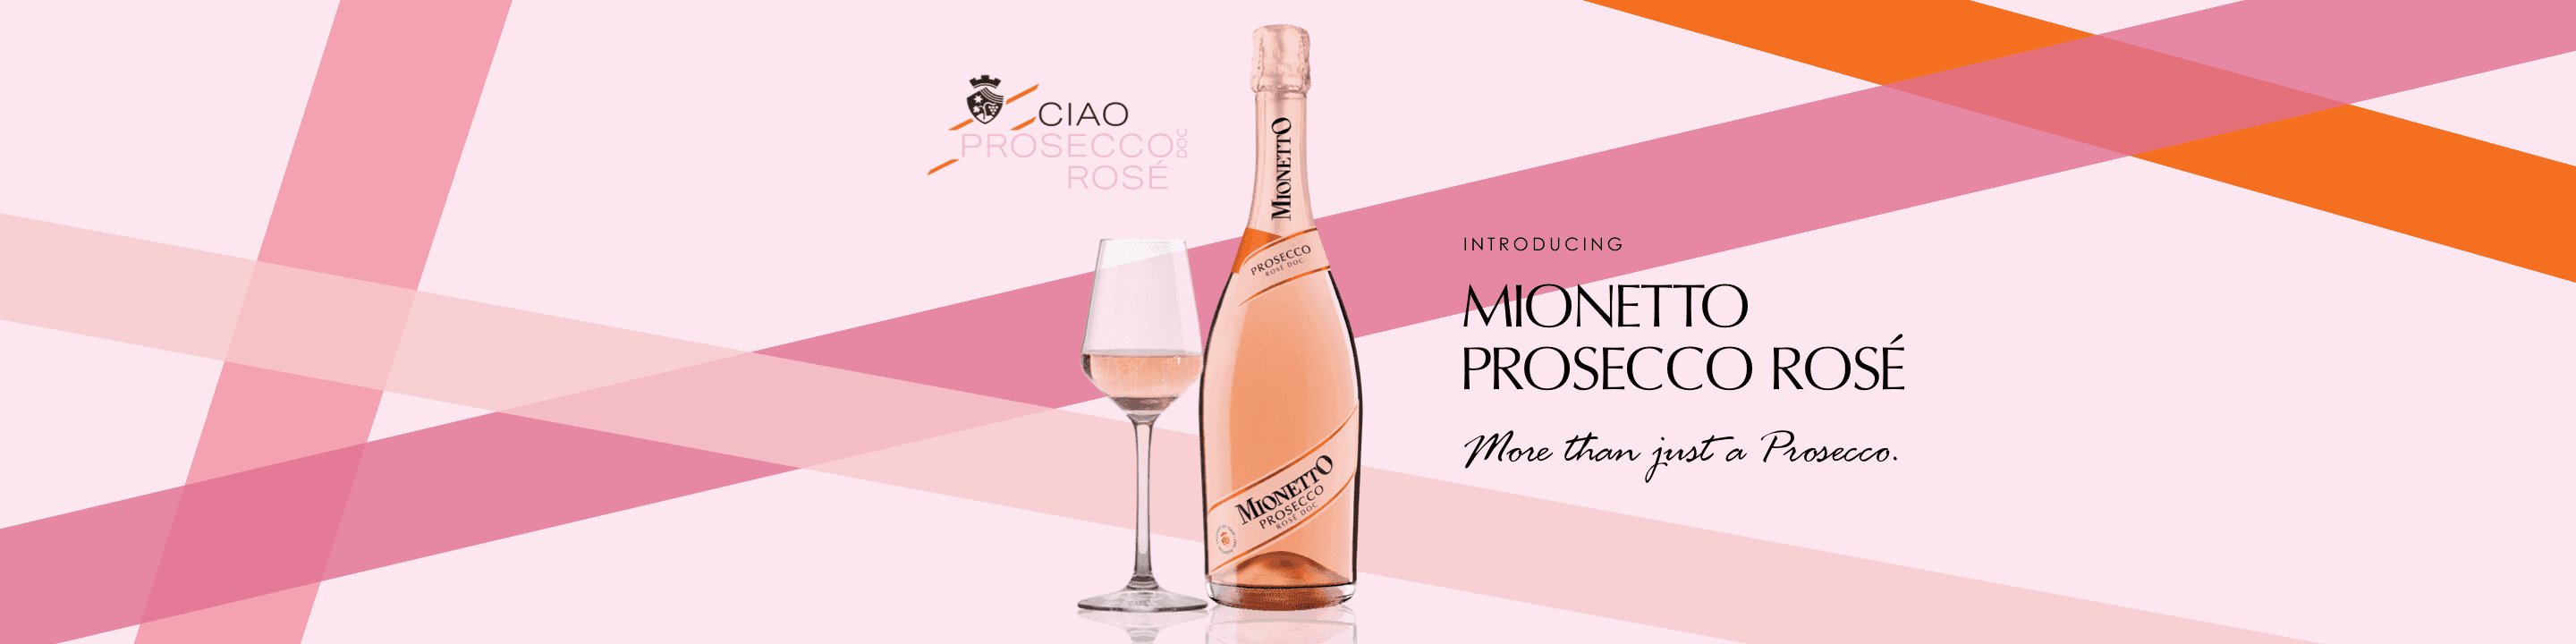 Since 1887, Mionetto has inspired Italians to truly taste the good life.  With its light, crisp and refreshing flavors, Mionetto helps you celebrate all of life’s moments, big or small. 
Share Mionetto. Mionetto. More than just a Prosecco.